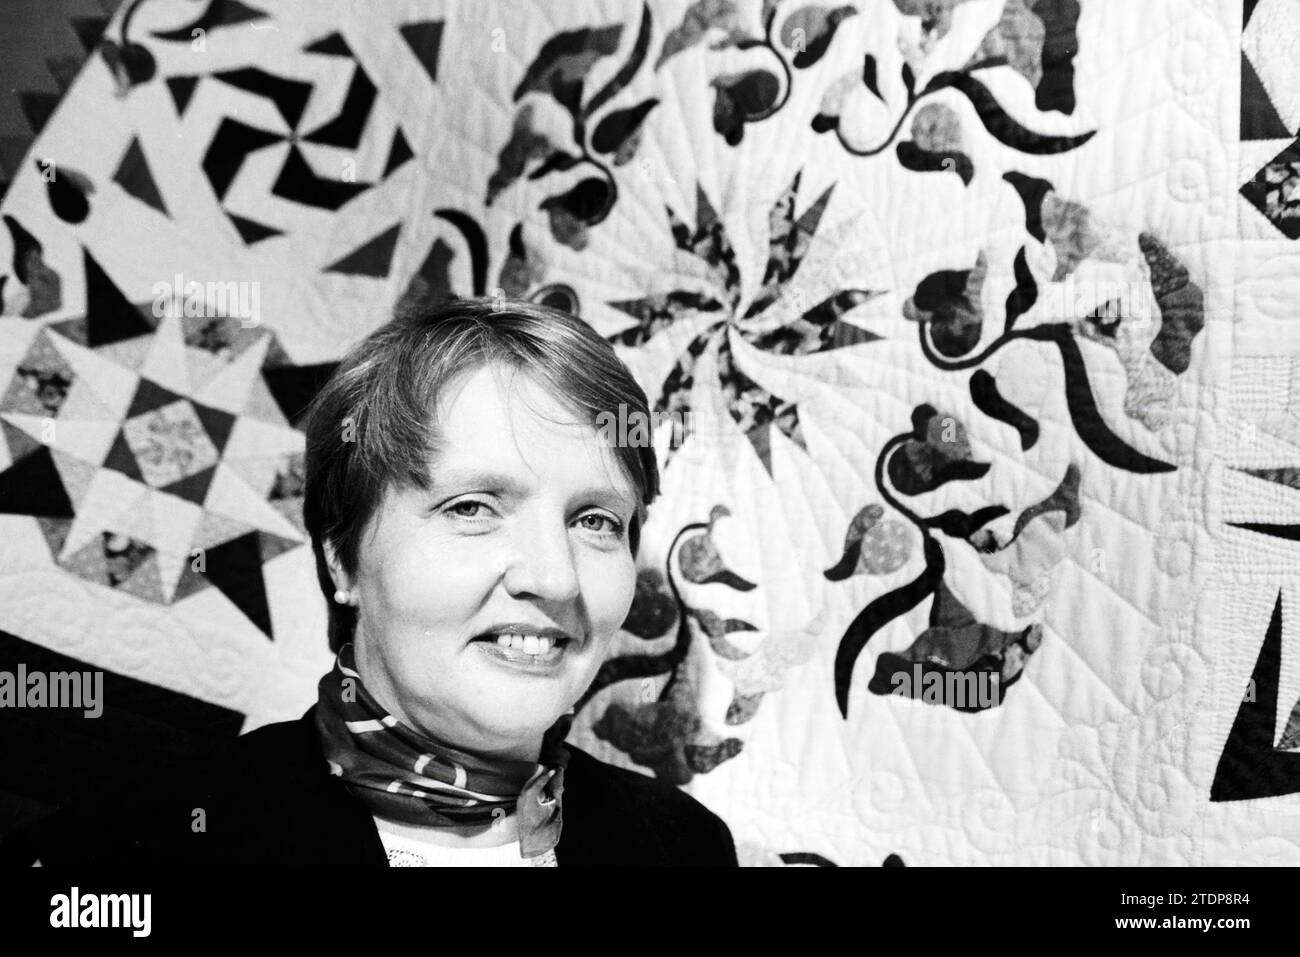 Mrs Veltkamp, quilts, Haarlem, The Netherlands, 28-09-1997, Whizgle News from the Past, Tailored for the Future. Explore historical narratives, Dutch The Netherlands agency image with a modern perspective, bridging the gap between yesterday's events and tomorrow's insights. A timeless journey shaping the stories that shape our future Stock Photo